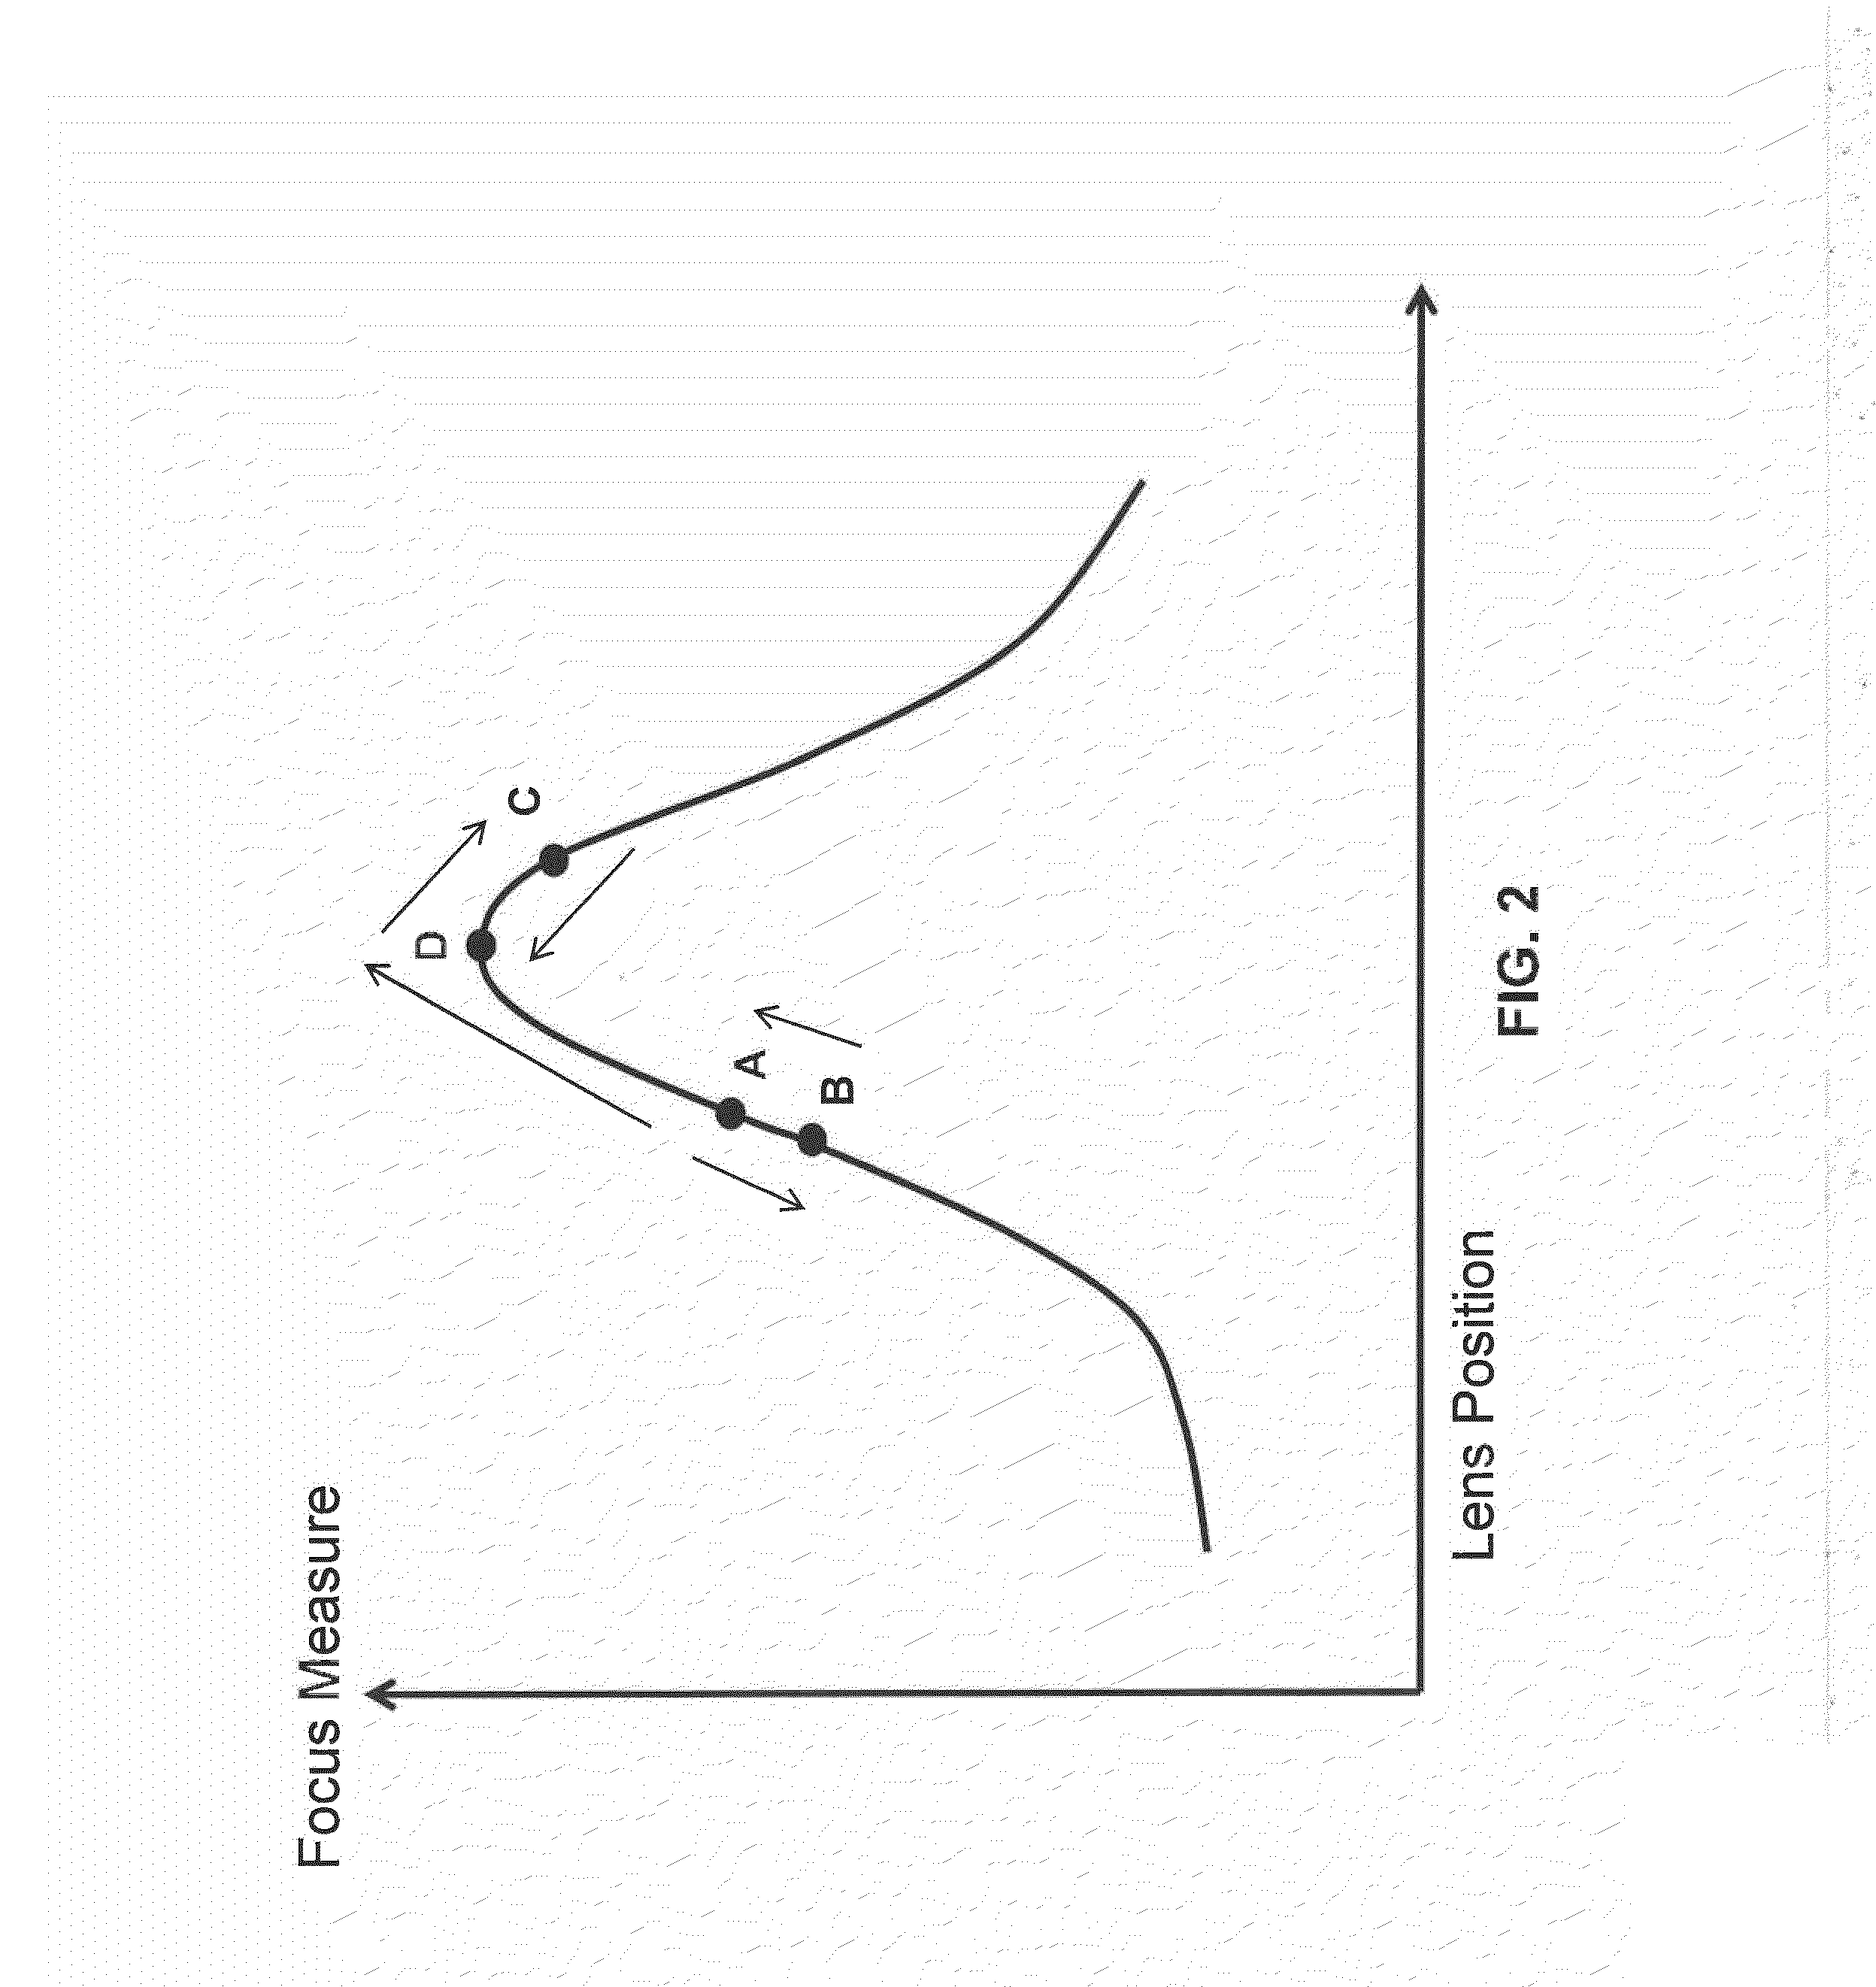 Method and System for an Adaptive Auto-Focus Algorithm